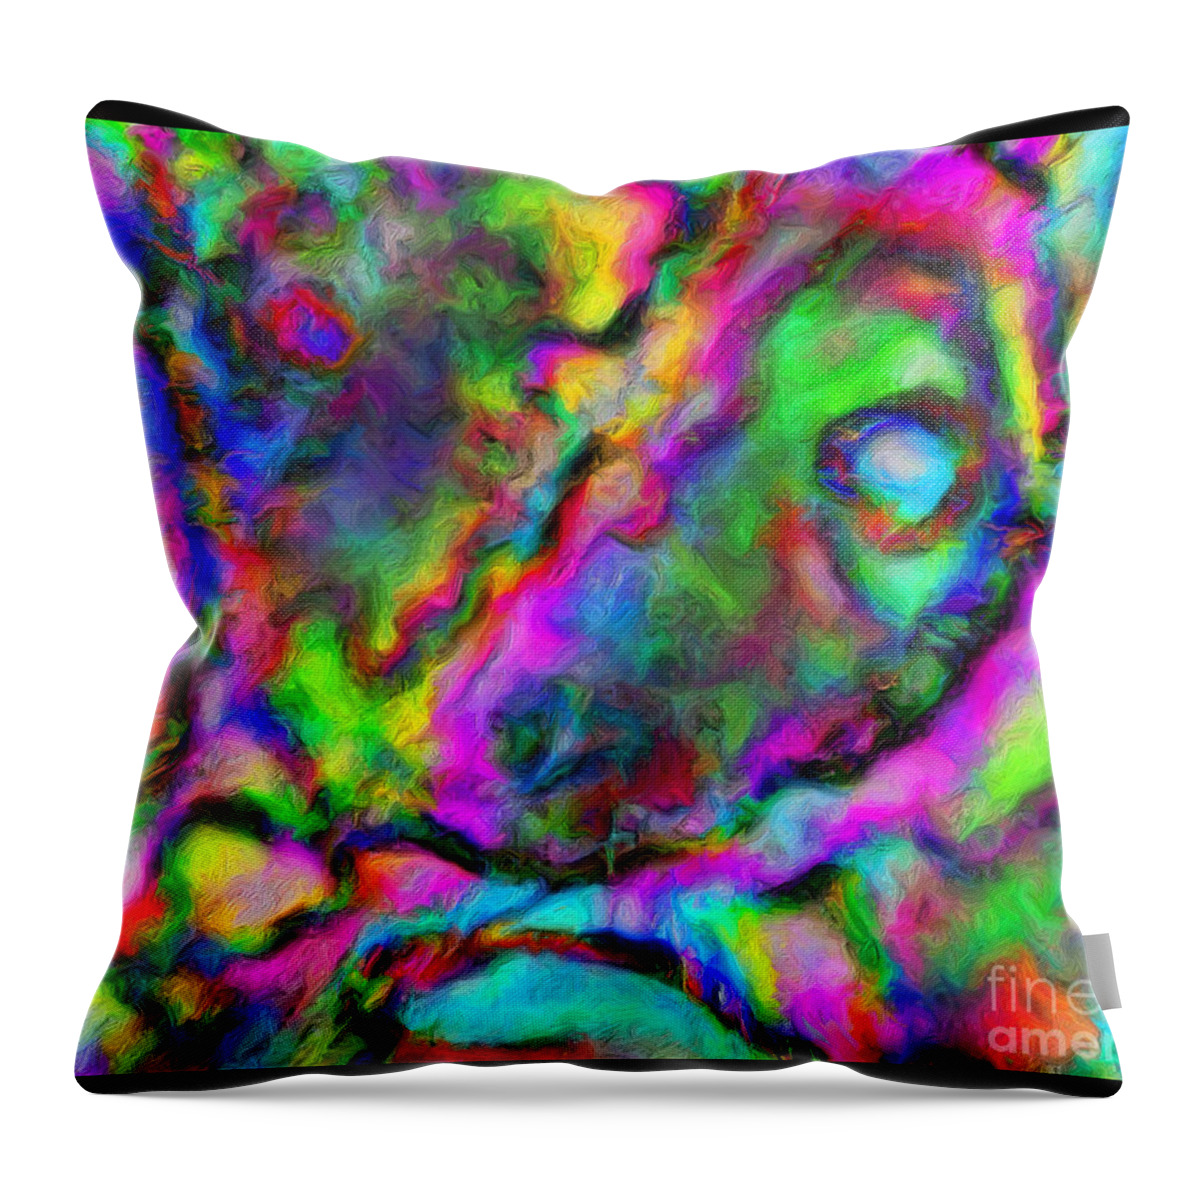 Doors Of Perception Throw Pillow featuring the digital art Break On Through by Ethan Chodos